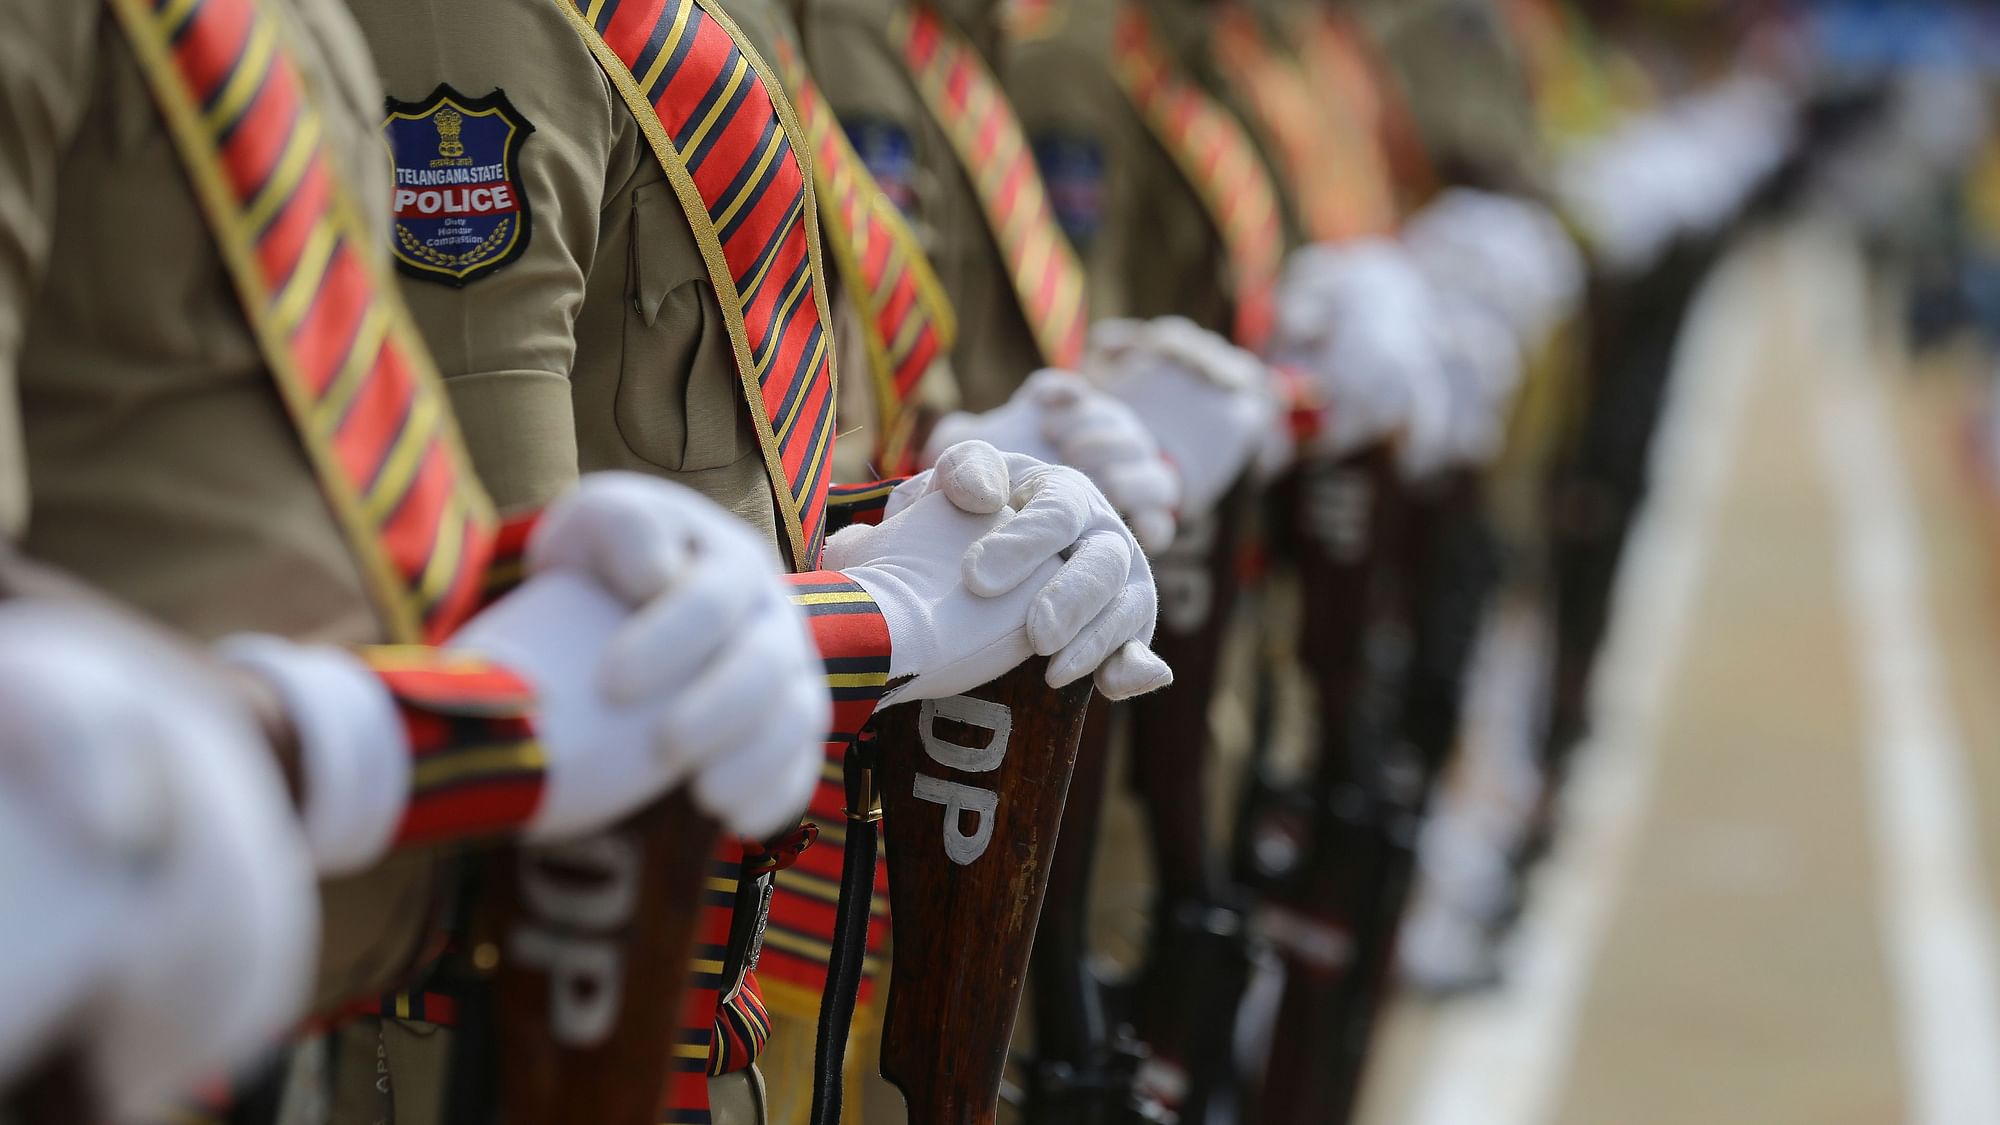 Indian policemen pay homage during a parade on Police Commemoration Day in Hyderabad, India, Monday, 21 Oct 2019.